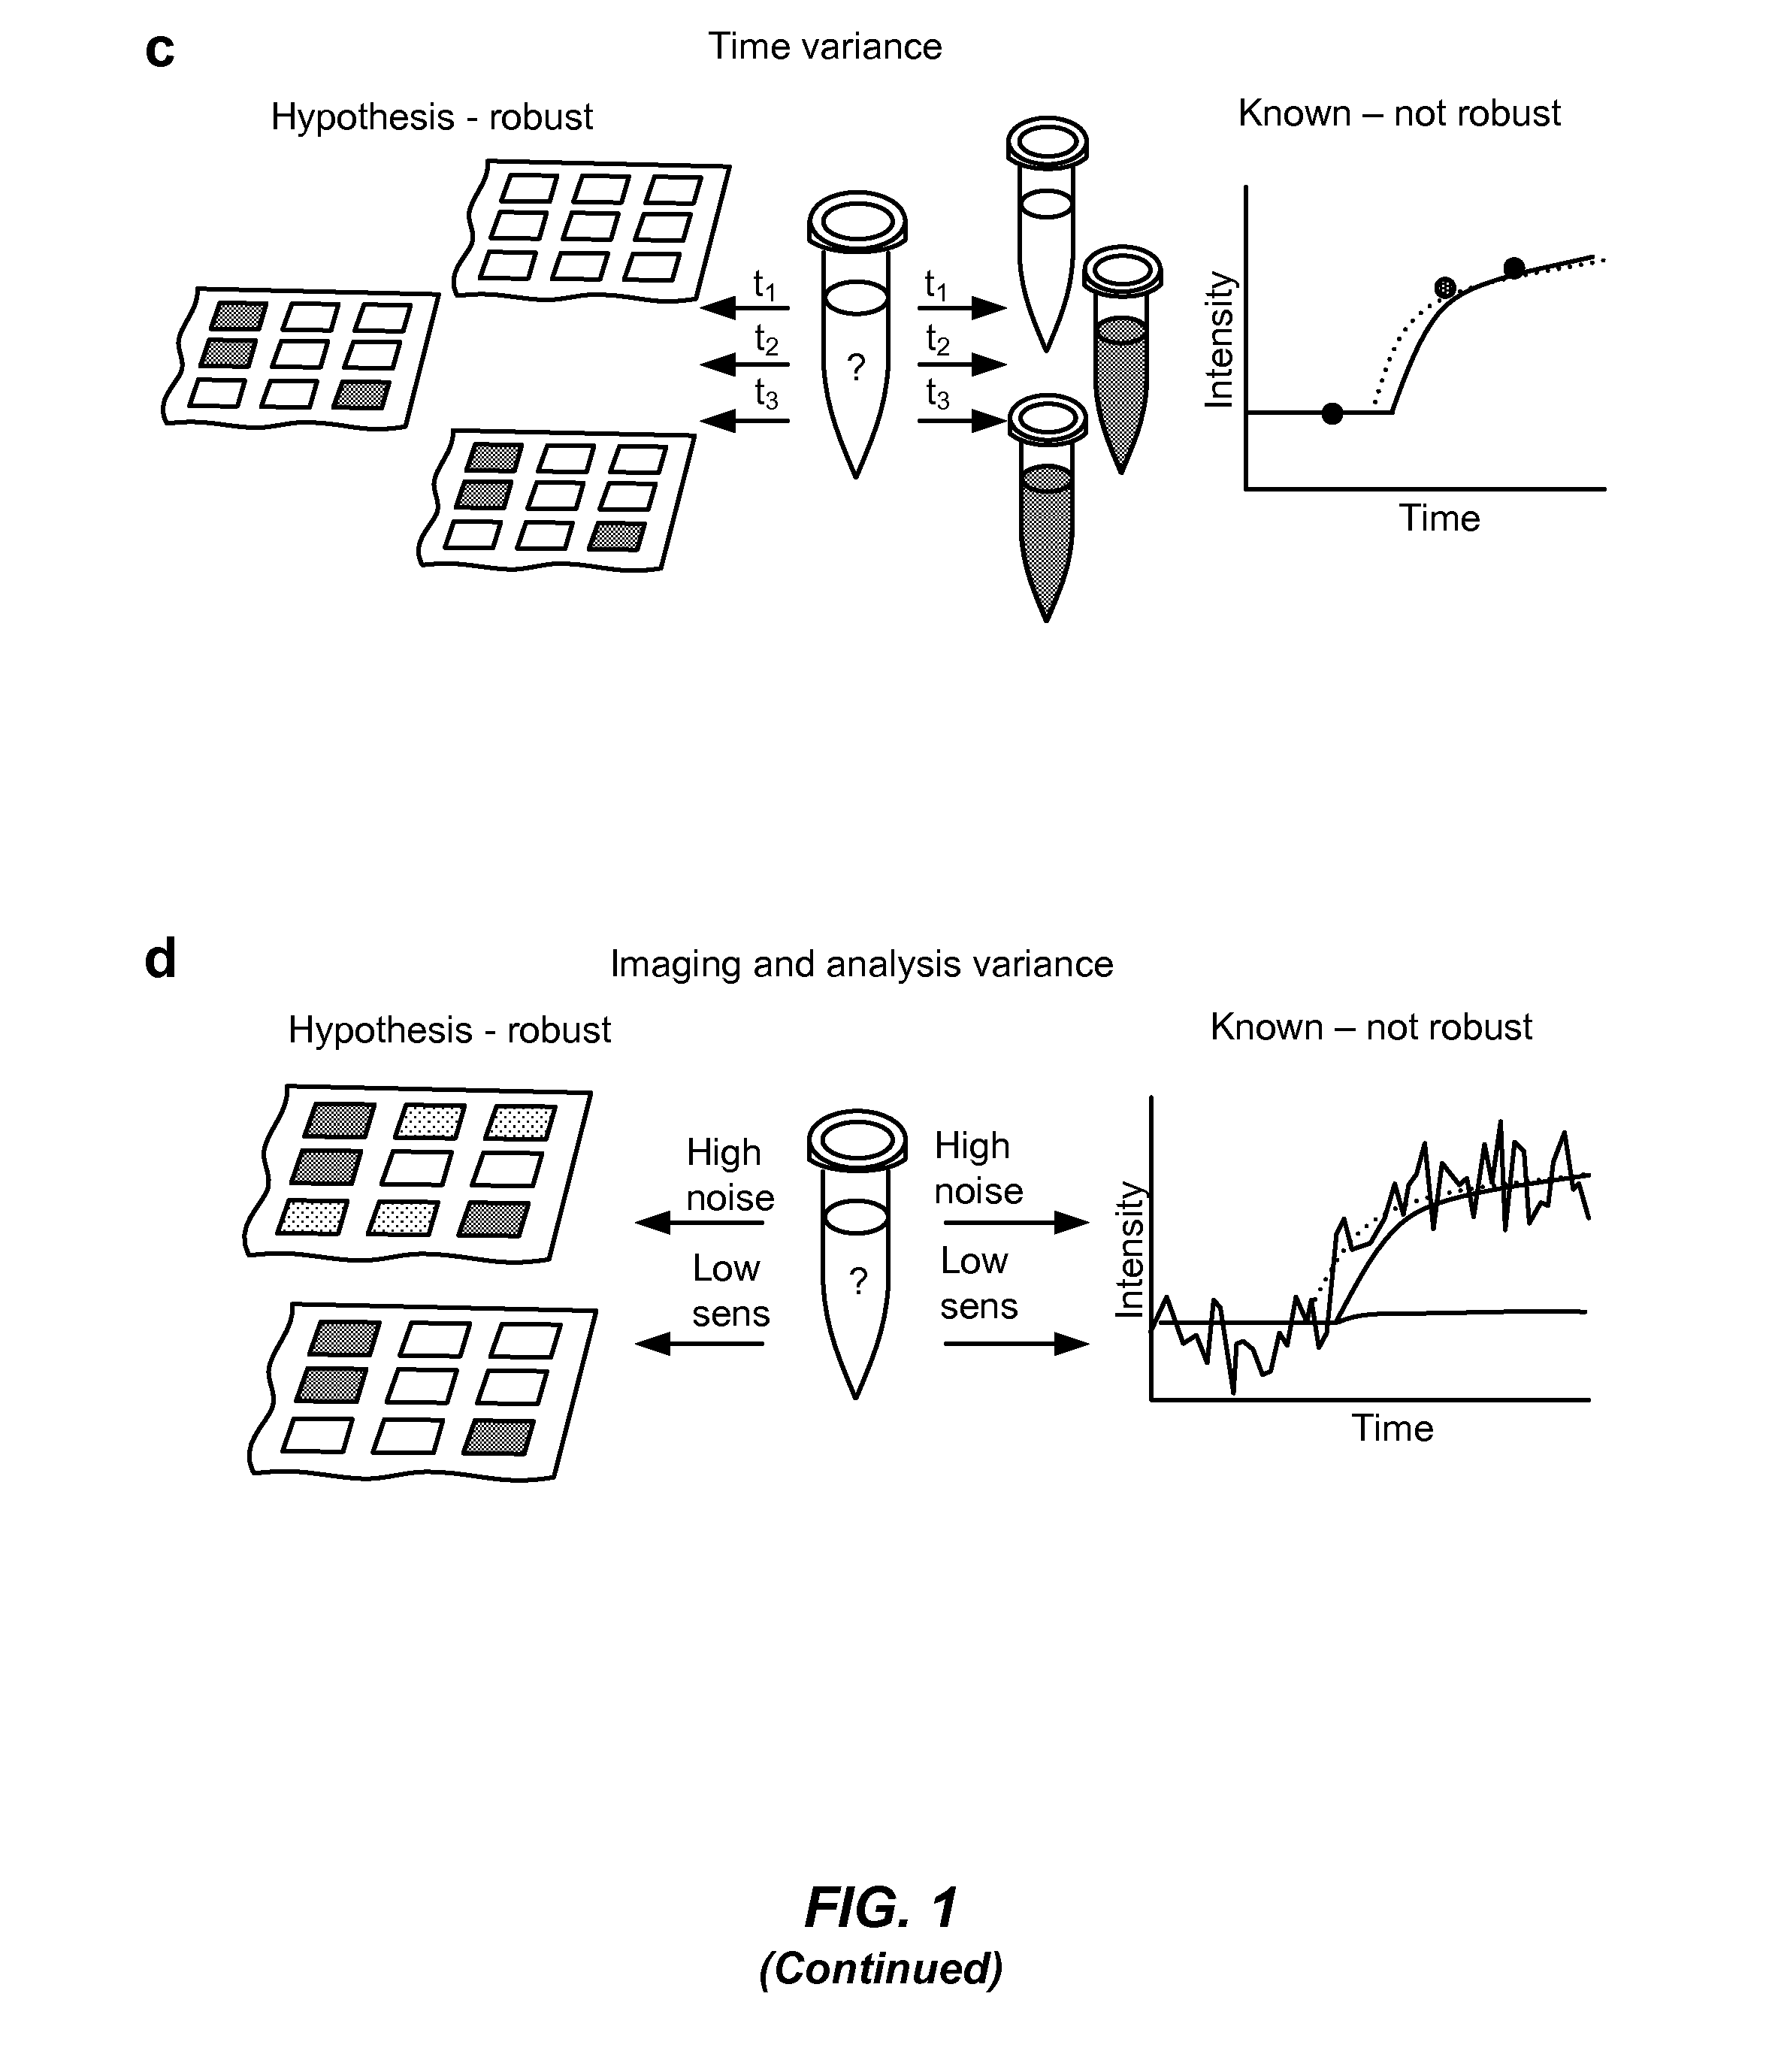 Methods and systems for microfluidics imaging and analysis